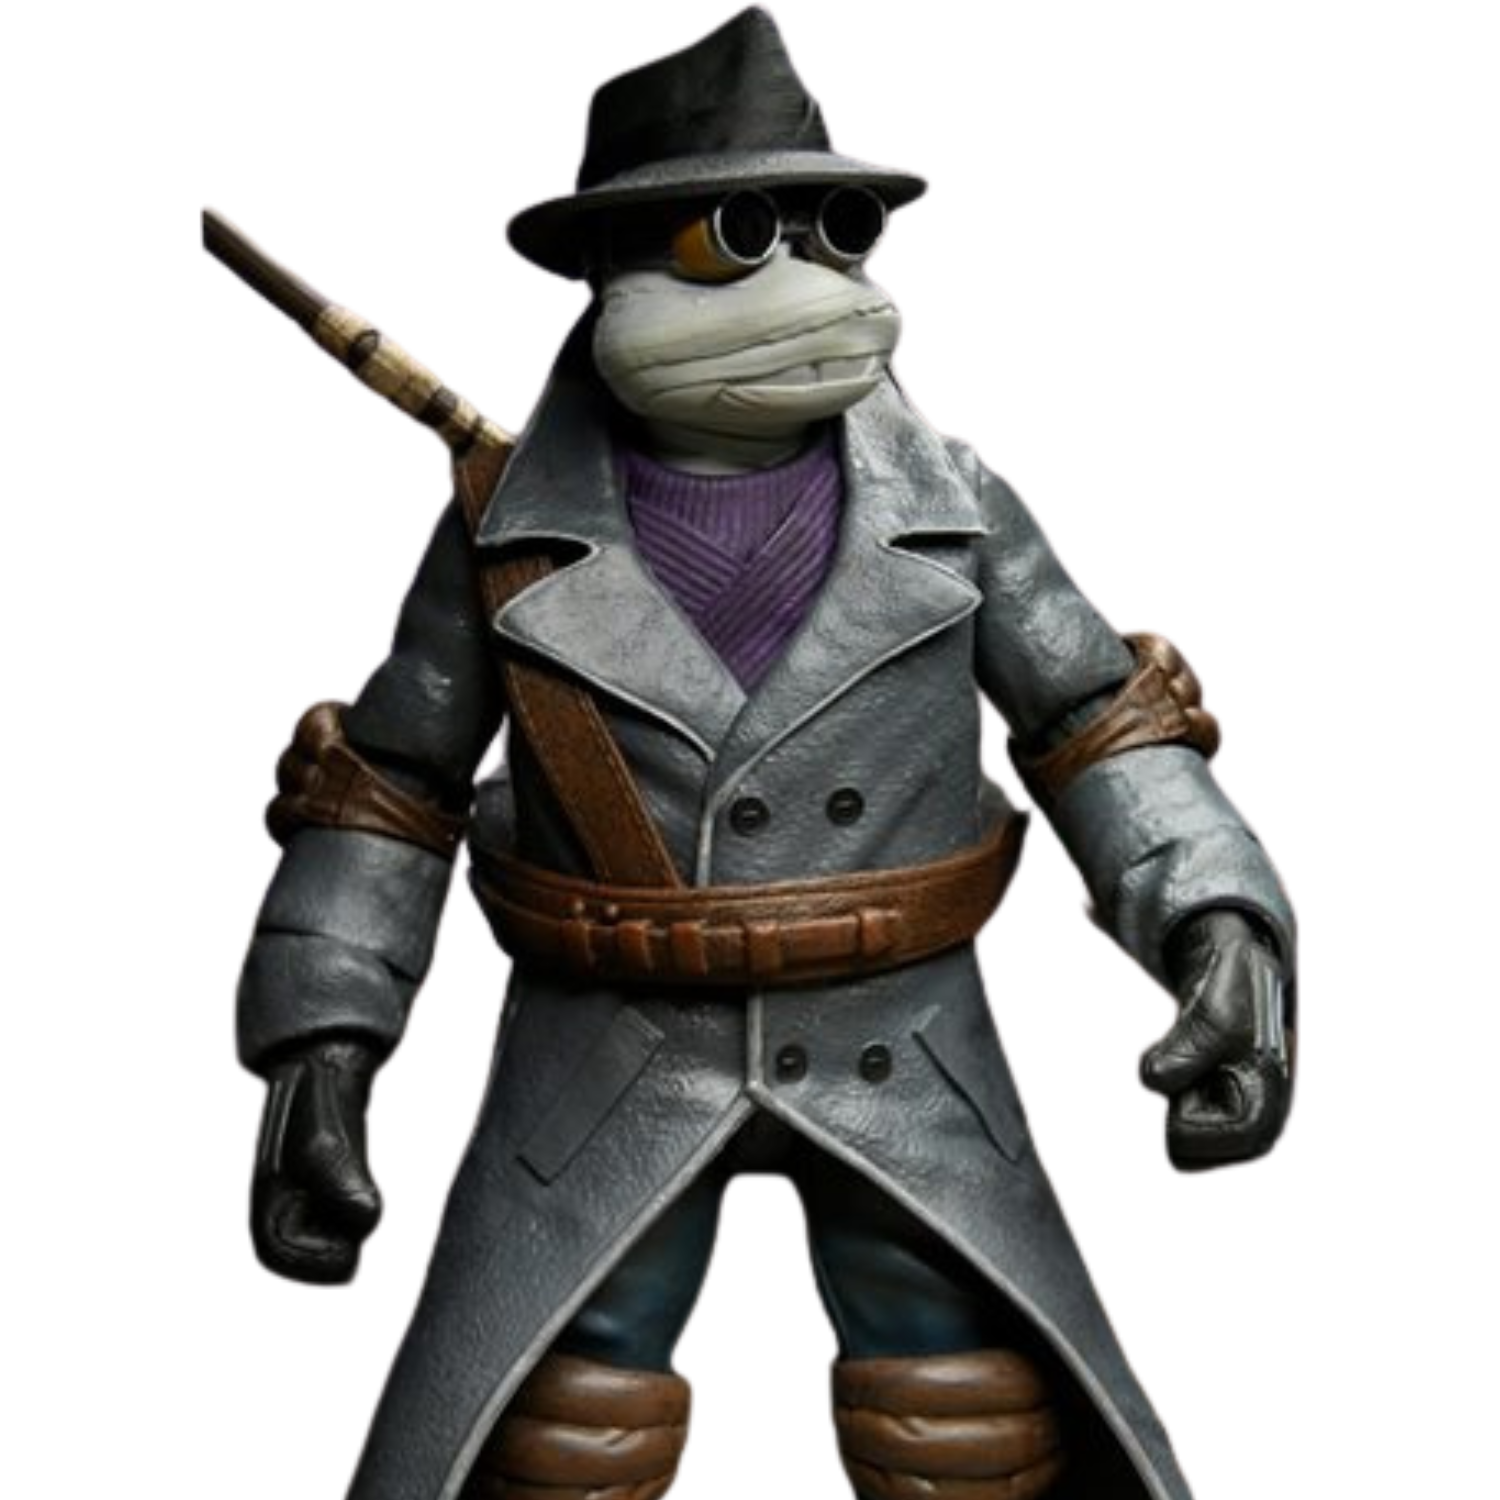 This image shows Donatello from the Ninja Turtles dressed as the Invisible Man